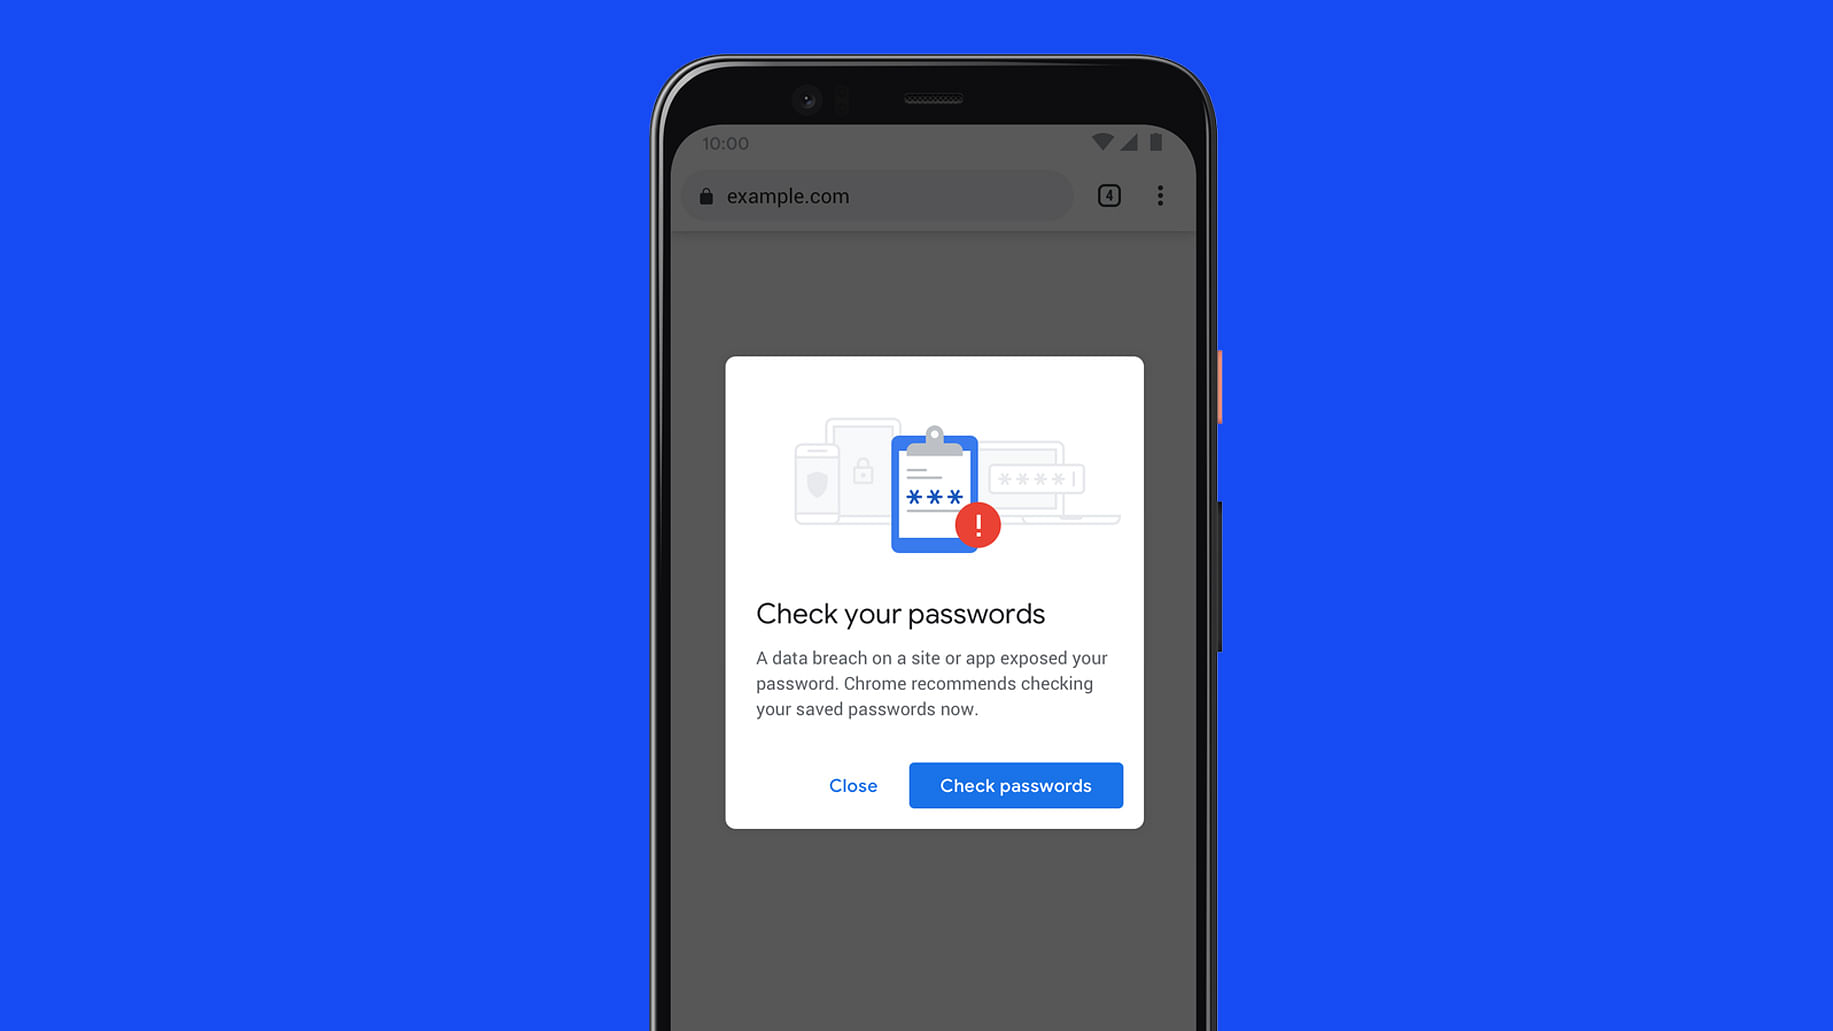 Google sends alerts if a password breach is detected.